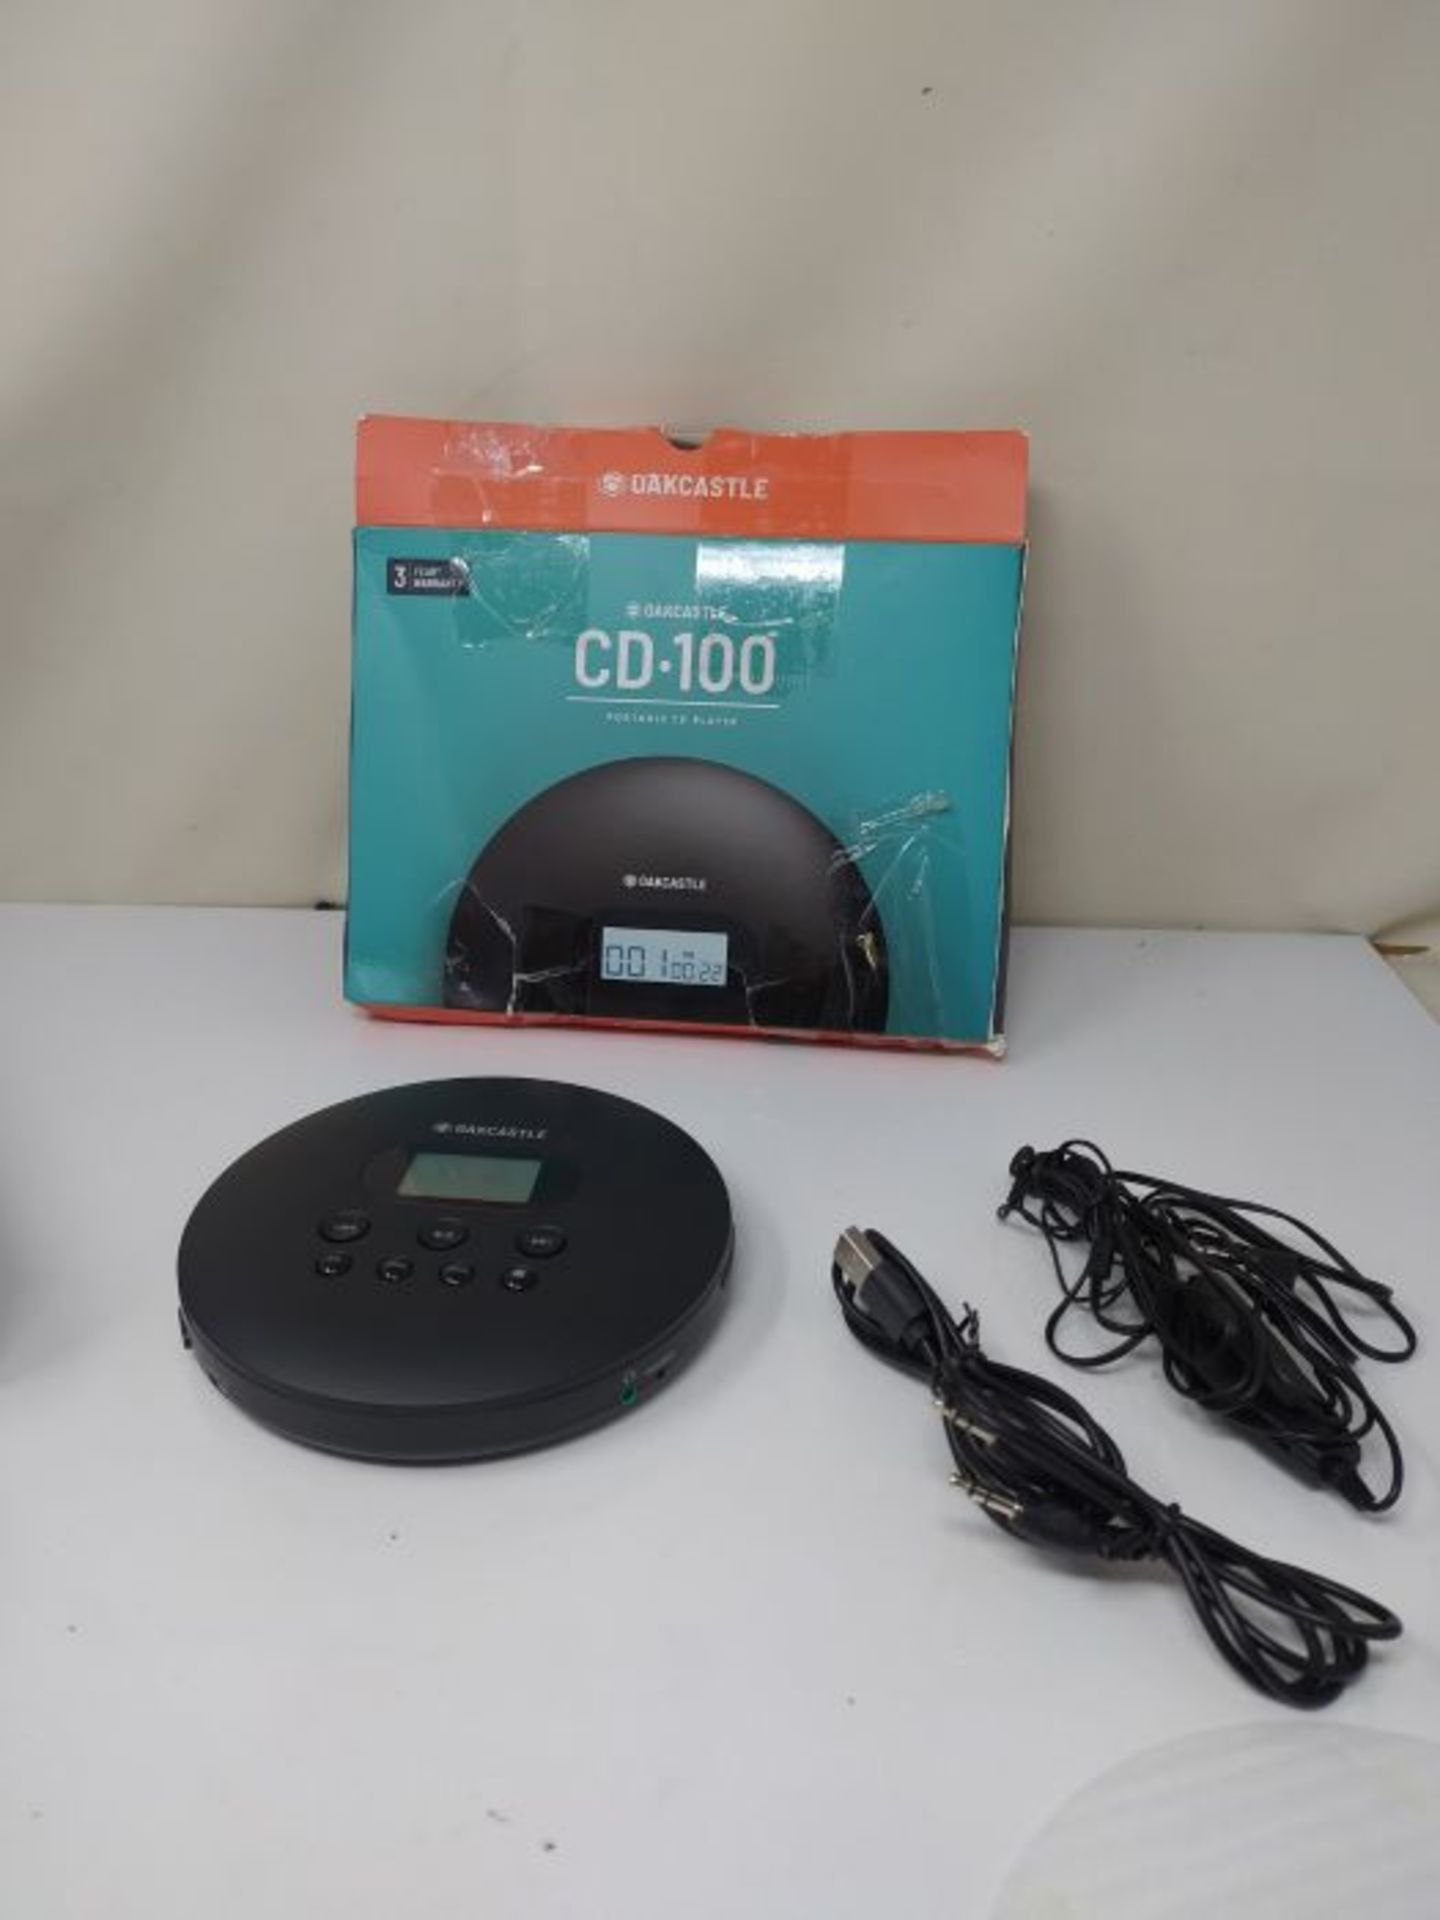 Oakcastle CD100 Portable Bluetooth CD Player | Rechargeable Battery with Headphones | - Image 2 of 2